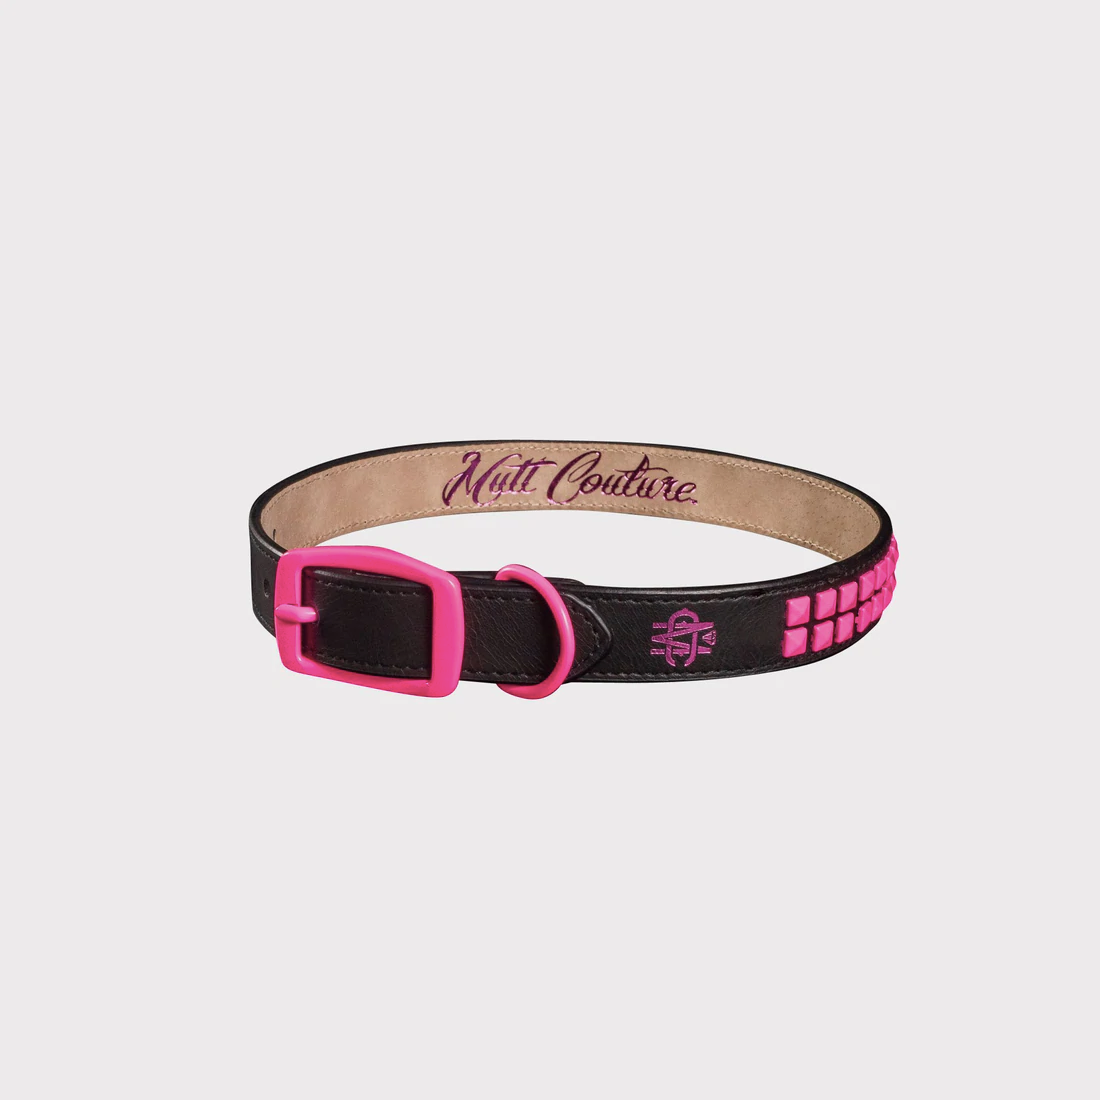 Mutt Couture Black Leather Dog Collar With Pink Studs Width .75 Inch